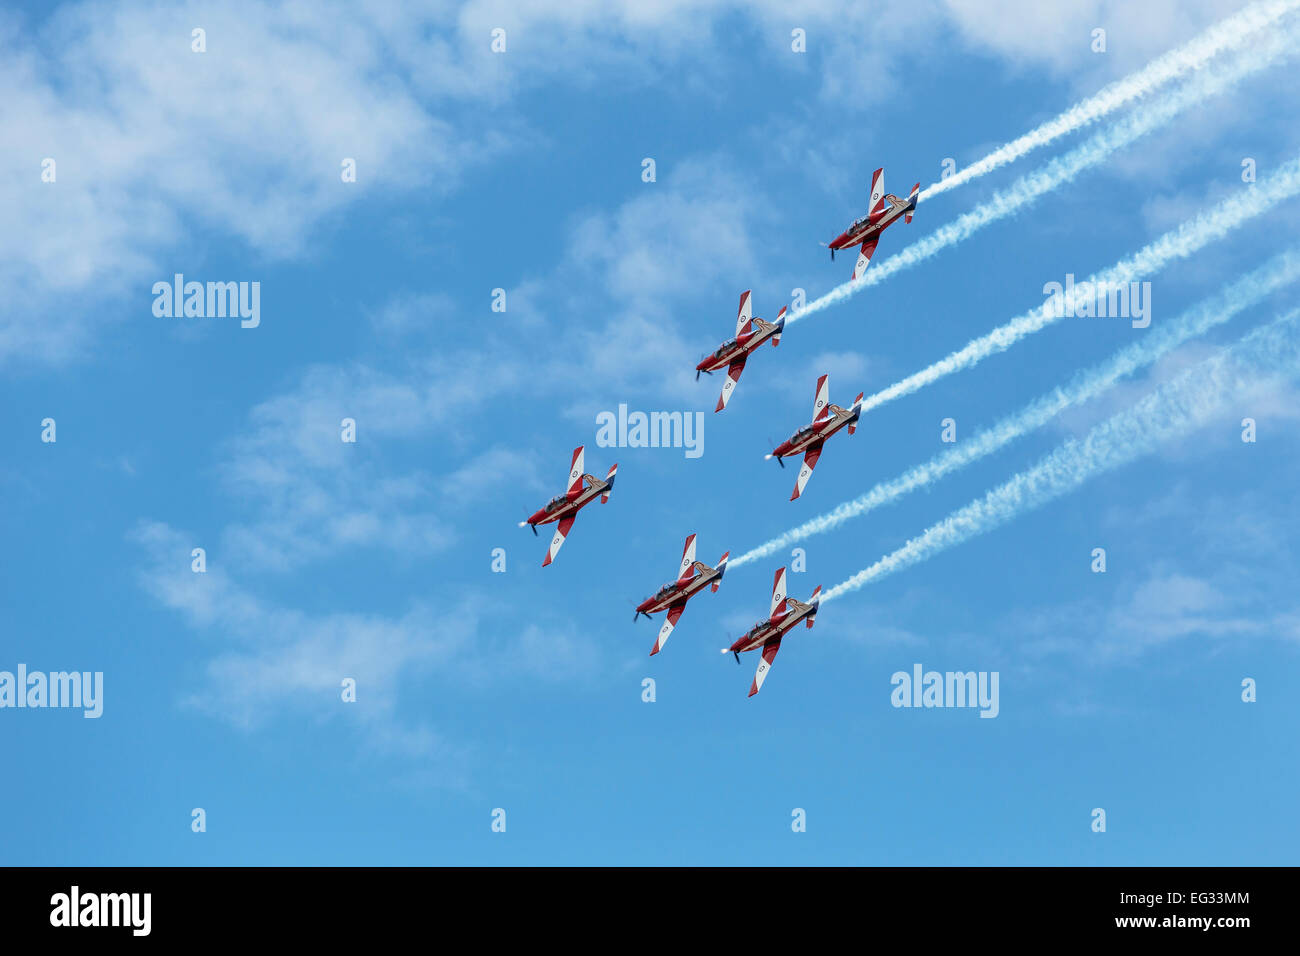 Royal Australian Air Force's Roulettes aerobatic display in Melbourne for Australia Day Stock Photo